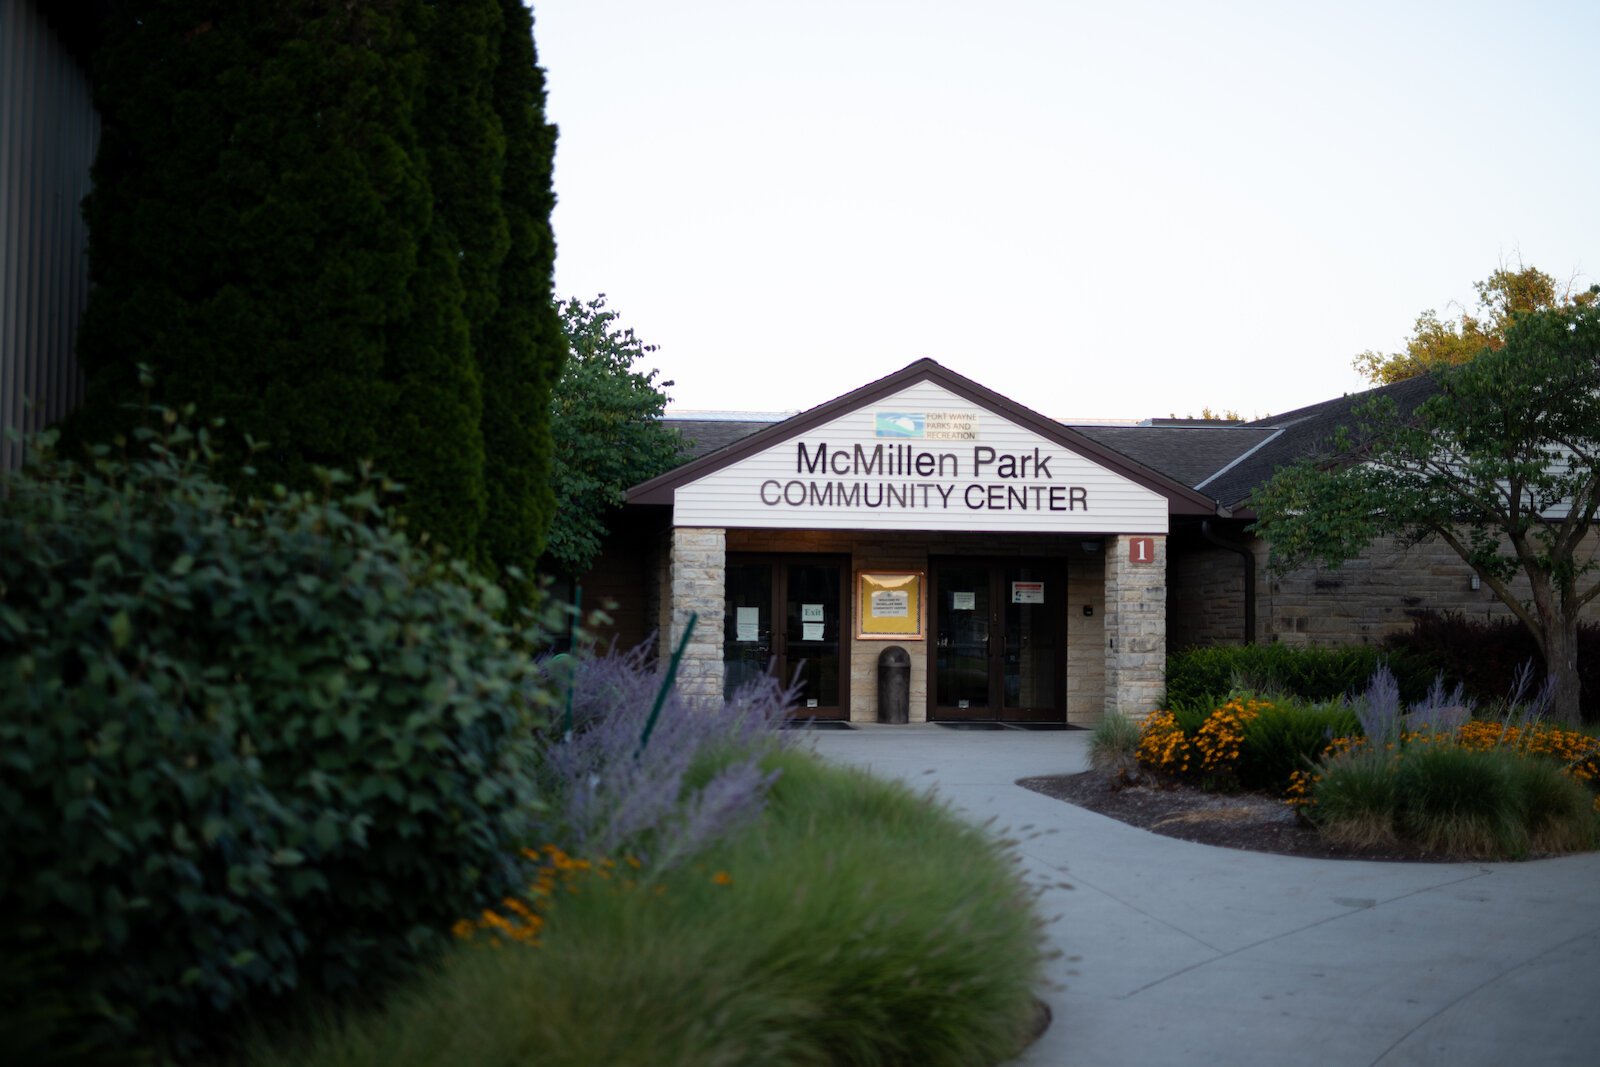 McMillen Park Community Center is located at 3901 Abbott St.